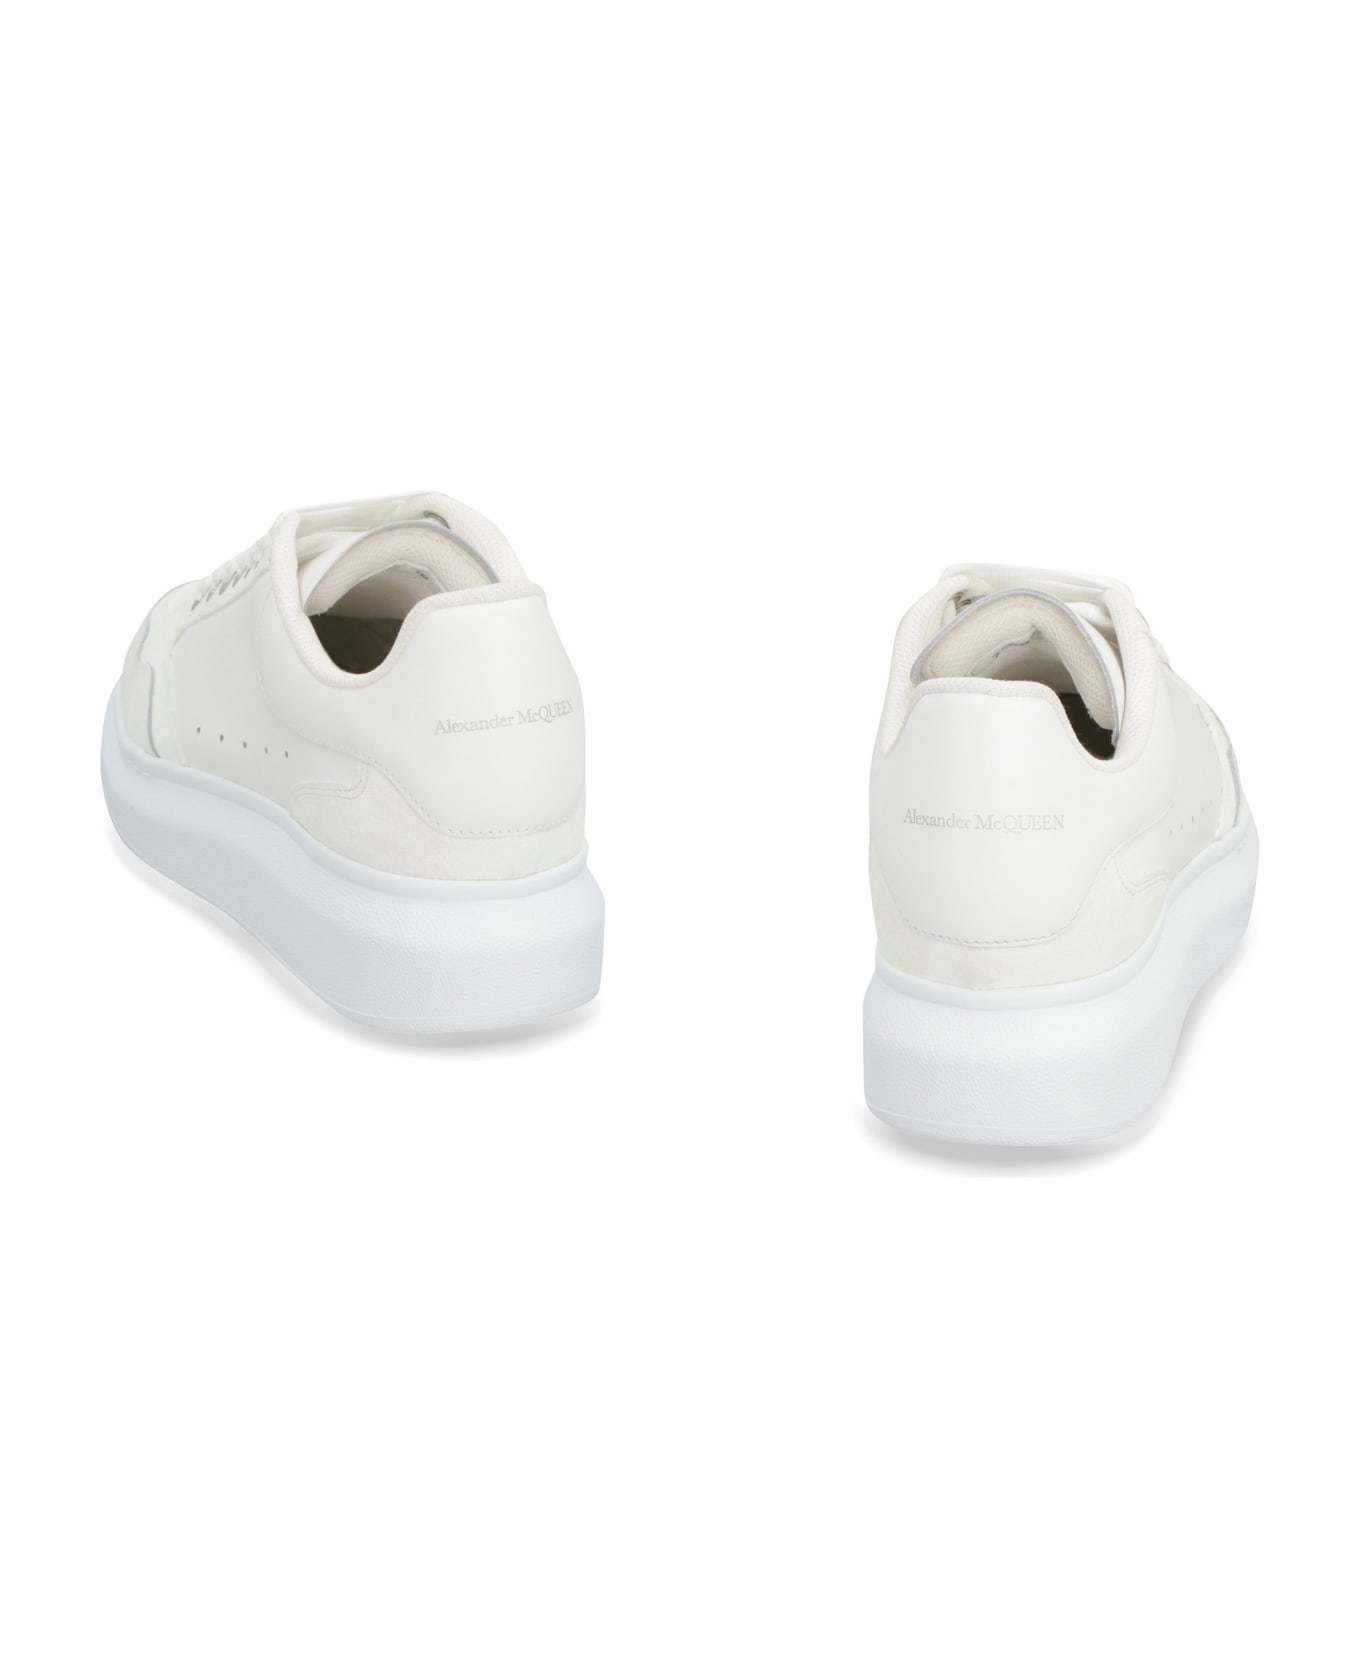 Alexander McQueen Larry Leather Low-top Sneakers - White ウェッジシューズ